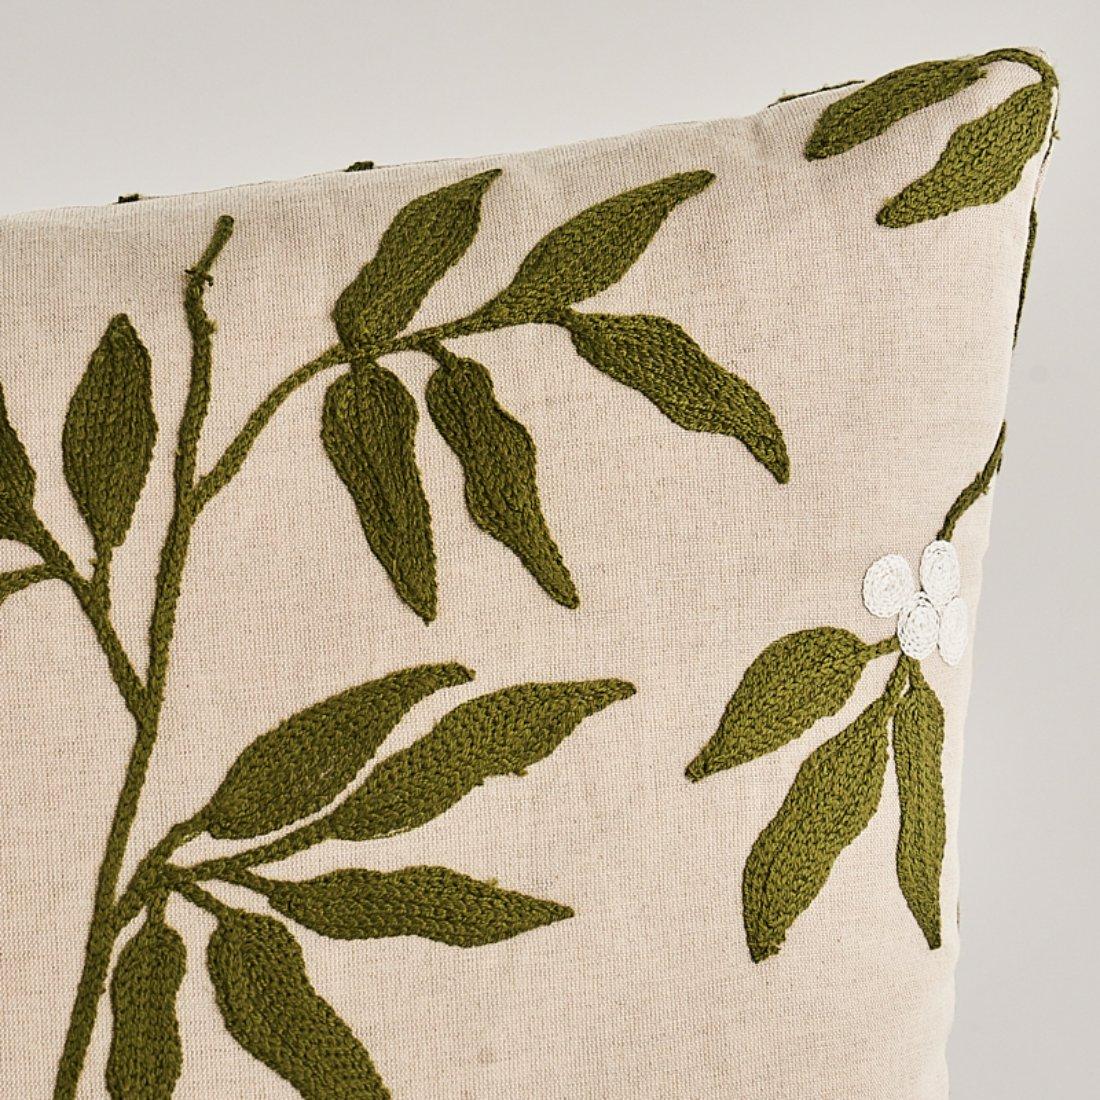 This pillow features Lilla Embroidery with a knife edge finish. With uncommonly large (nearly 11”) motifs, Lilla Embroidery in olive-on-neutral is a traditional design with modern leanings. The cotton-and-linen fabric is embroidered with a